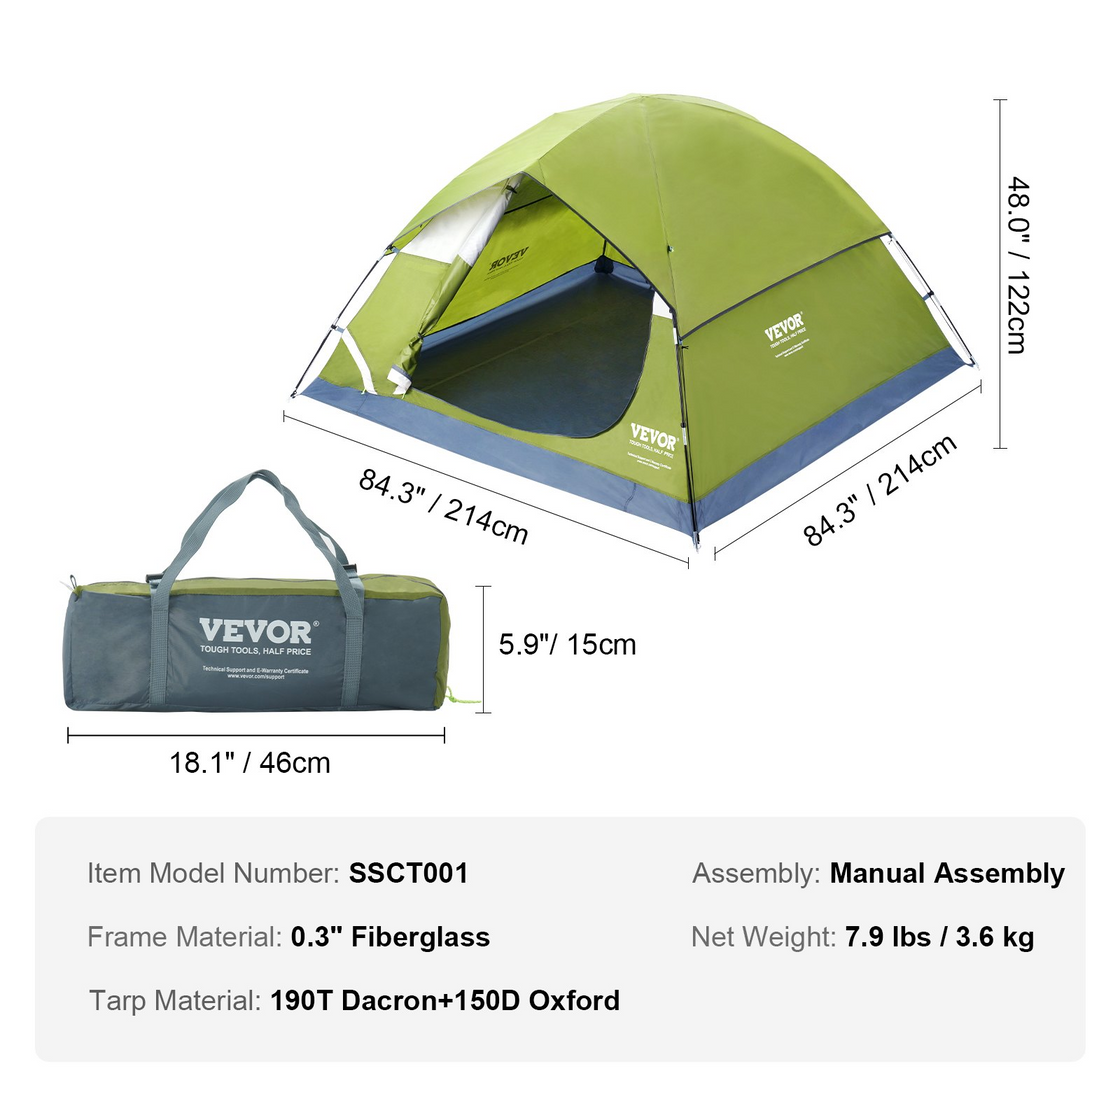 VEVOR Camping Tent - Waterproof Lightweight Backpacking Tent, Easy Setup, with Door and Window